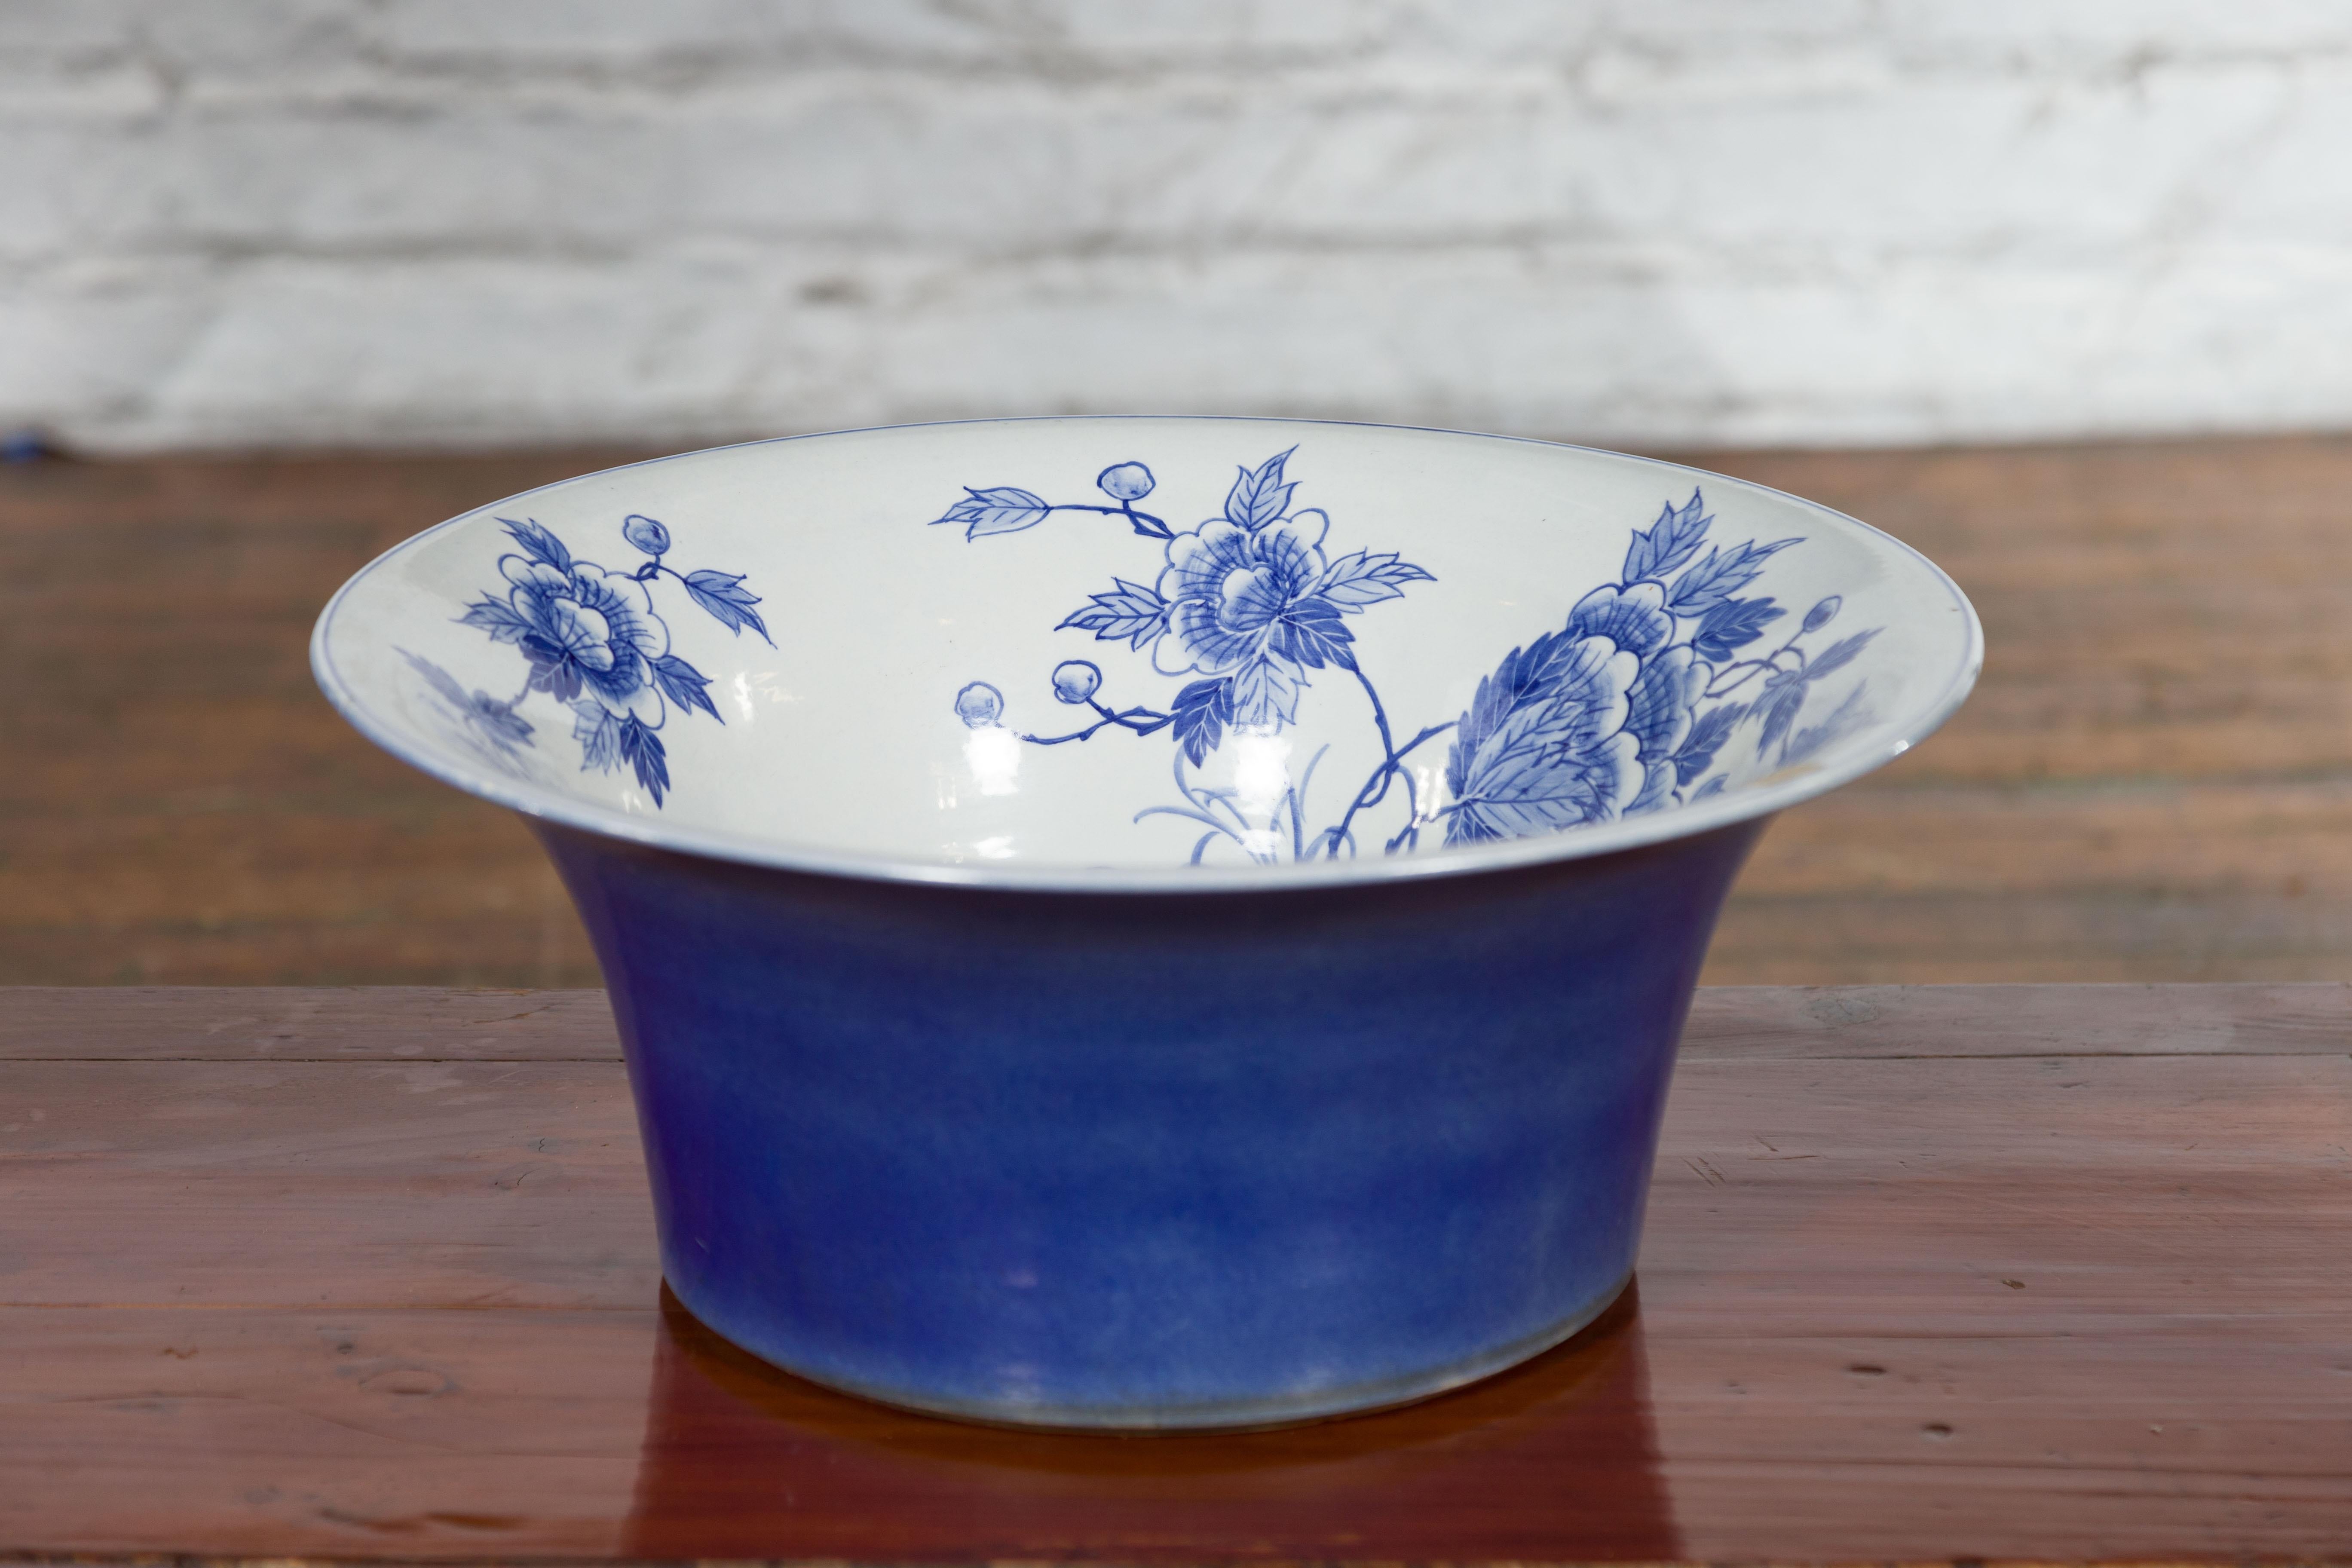 Chinese Blue and White Porcelain Wash Basin with Floral Motifs and Cobalt Blue In Good Condition For Sale In Yonkers, NY